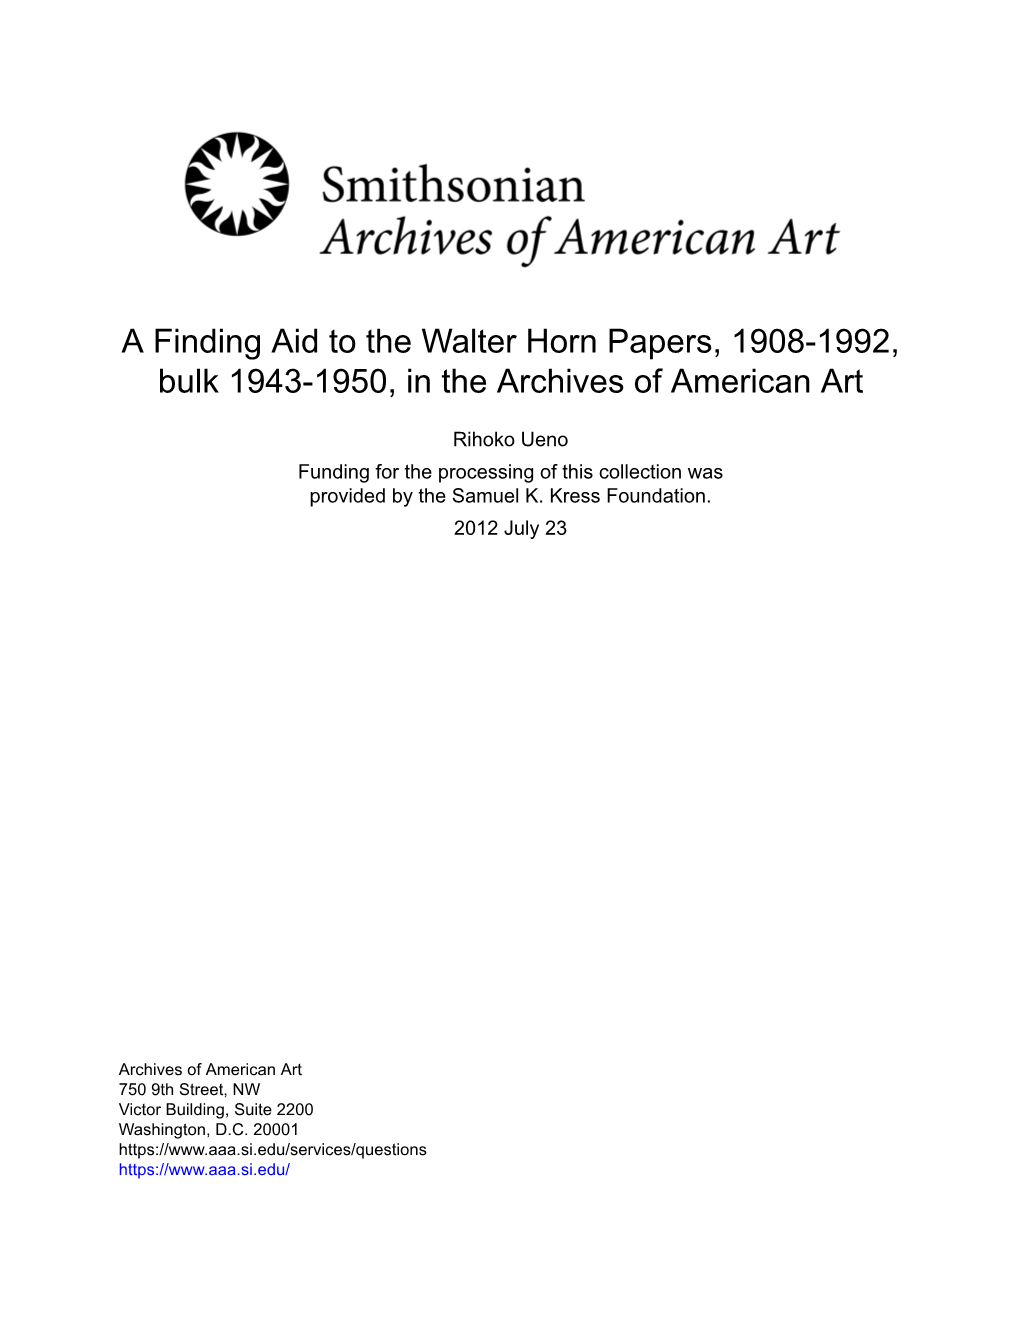 A Finding Aid to the Walter Horn Papers, 1908-1992, Bulk 1943-1950, in the Archives of American Art